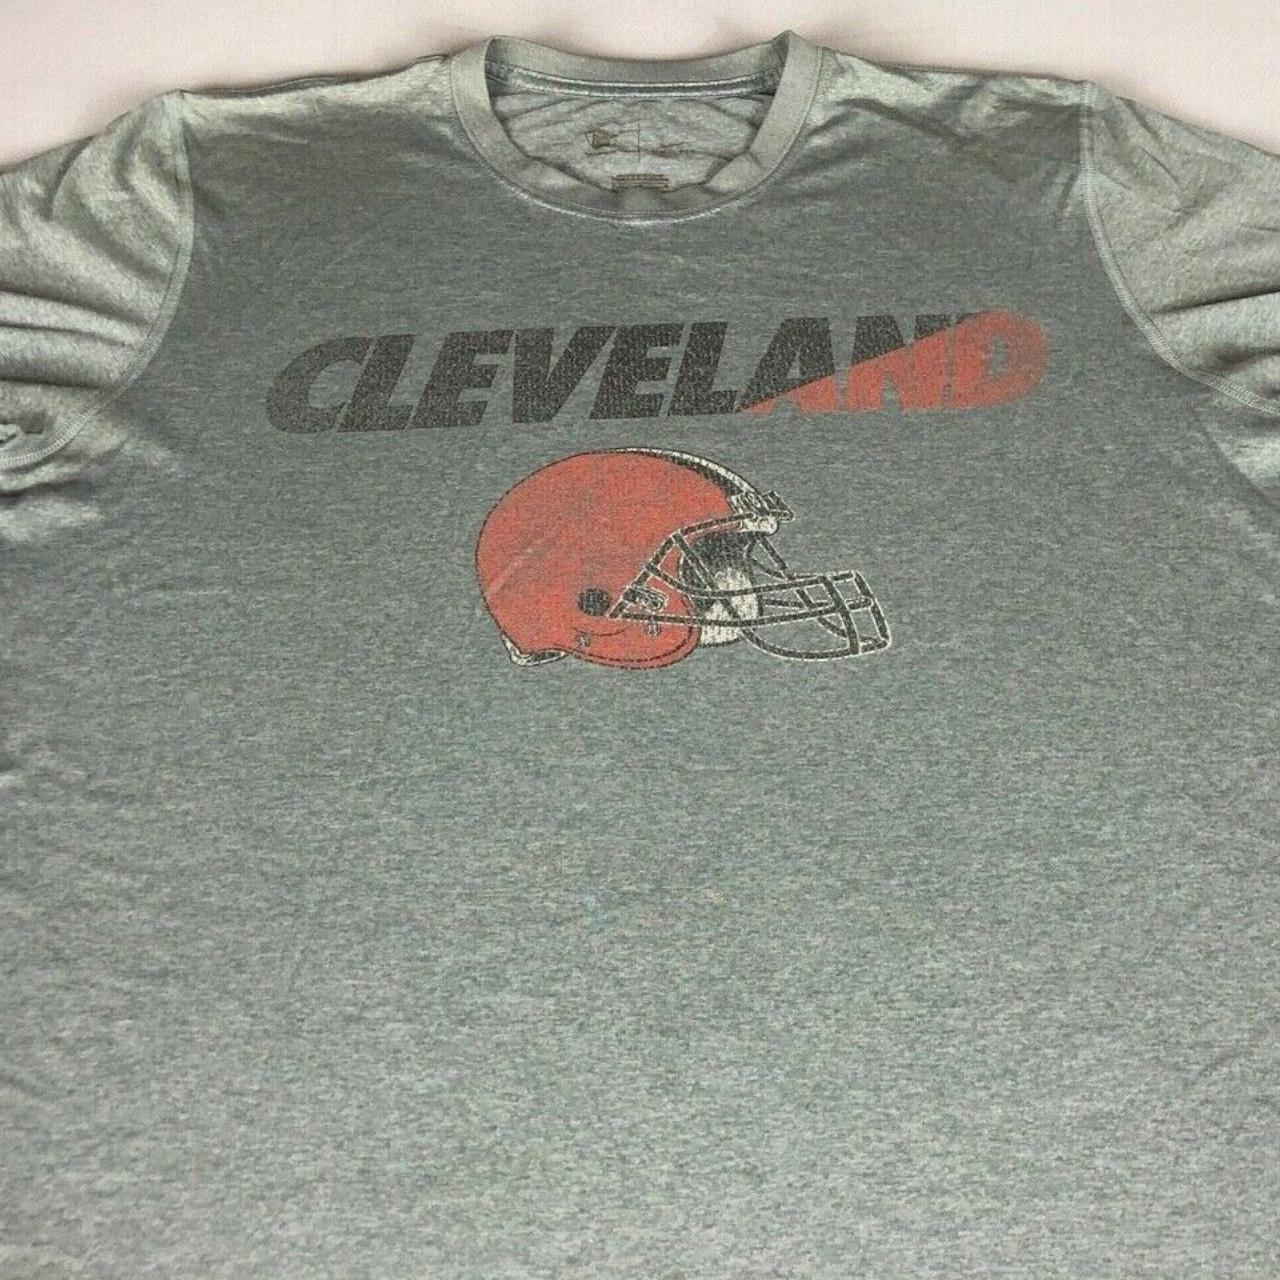 Product Image 2 - Cleveland Browns Shirt Mens Large